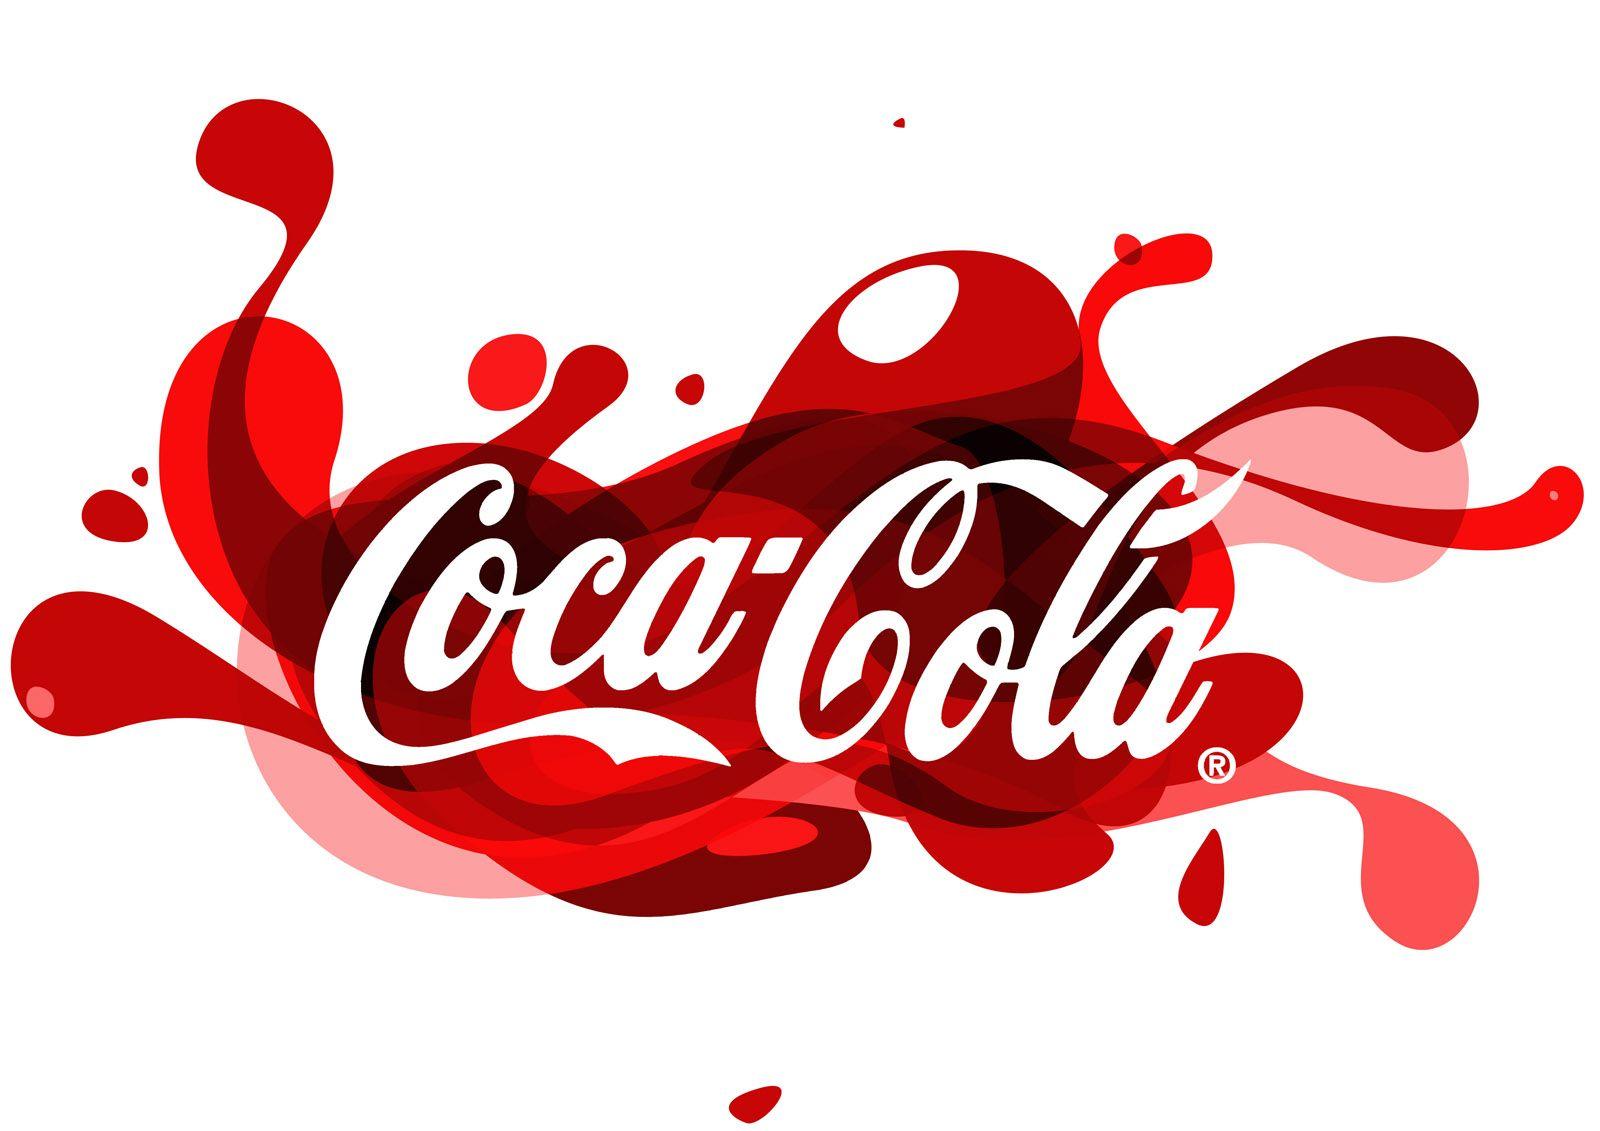 Related Picture Coca Cola Background Coca Cola Powerpoint Free